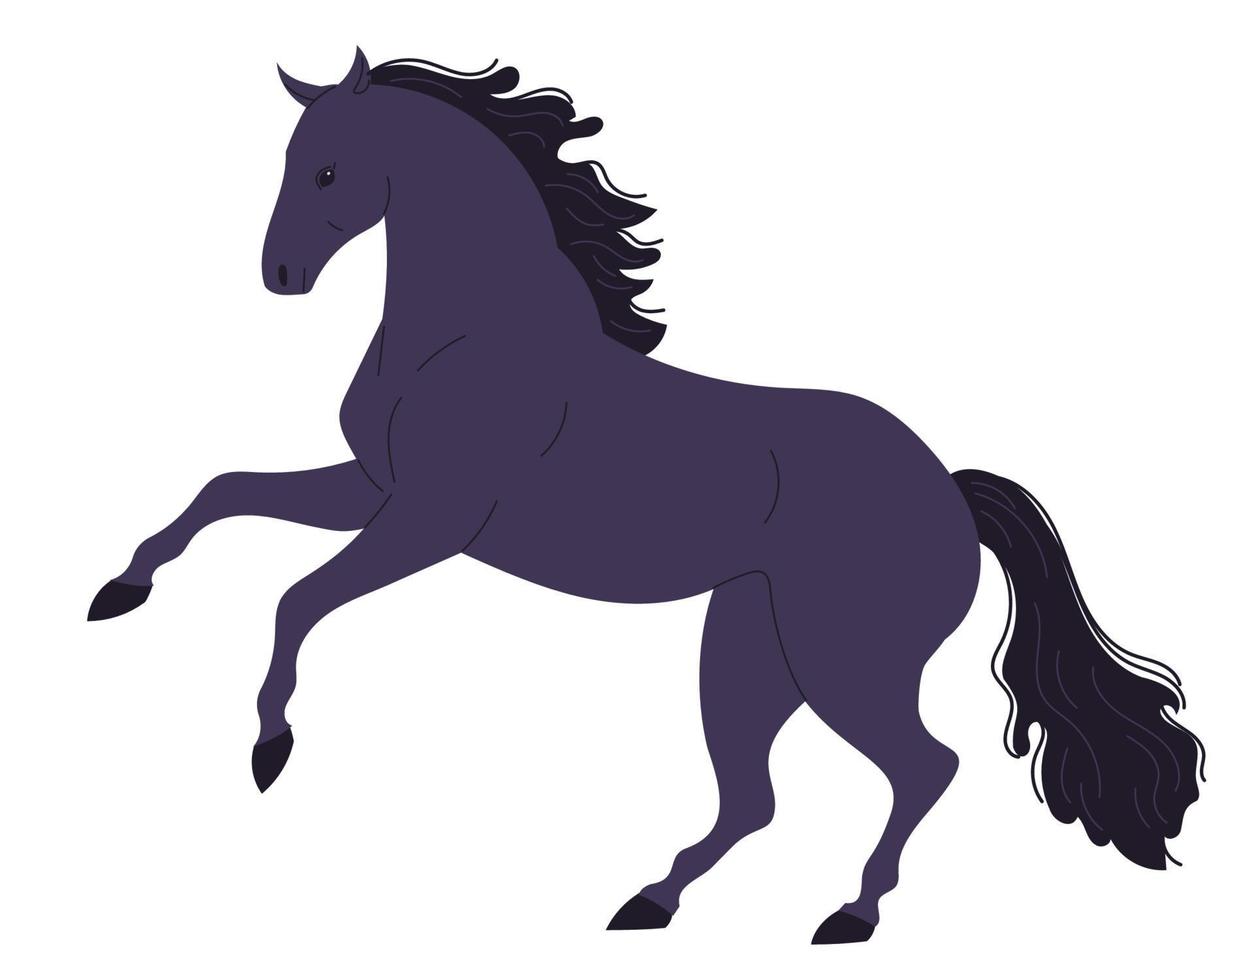 Dark energetic horse with its front hooves raised on its hind legs. vector